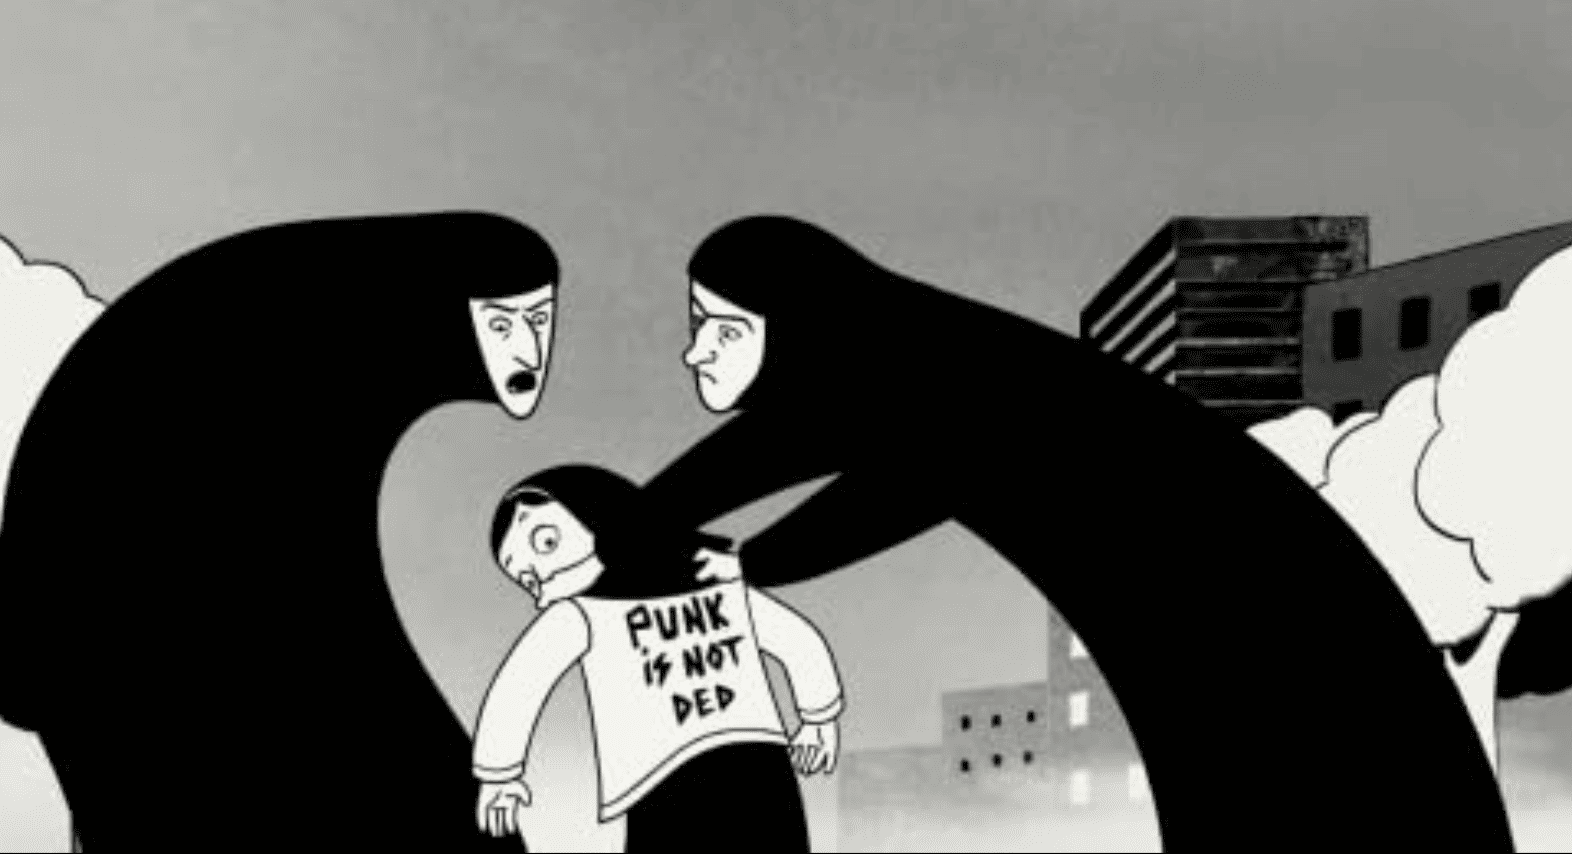 Two religious women interrogate a teenager who’s wearing a punk jacket in this image from Celluloid Dreams.